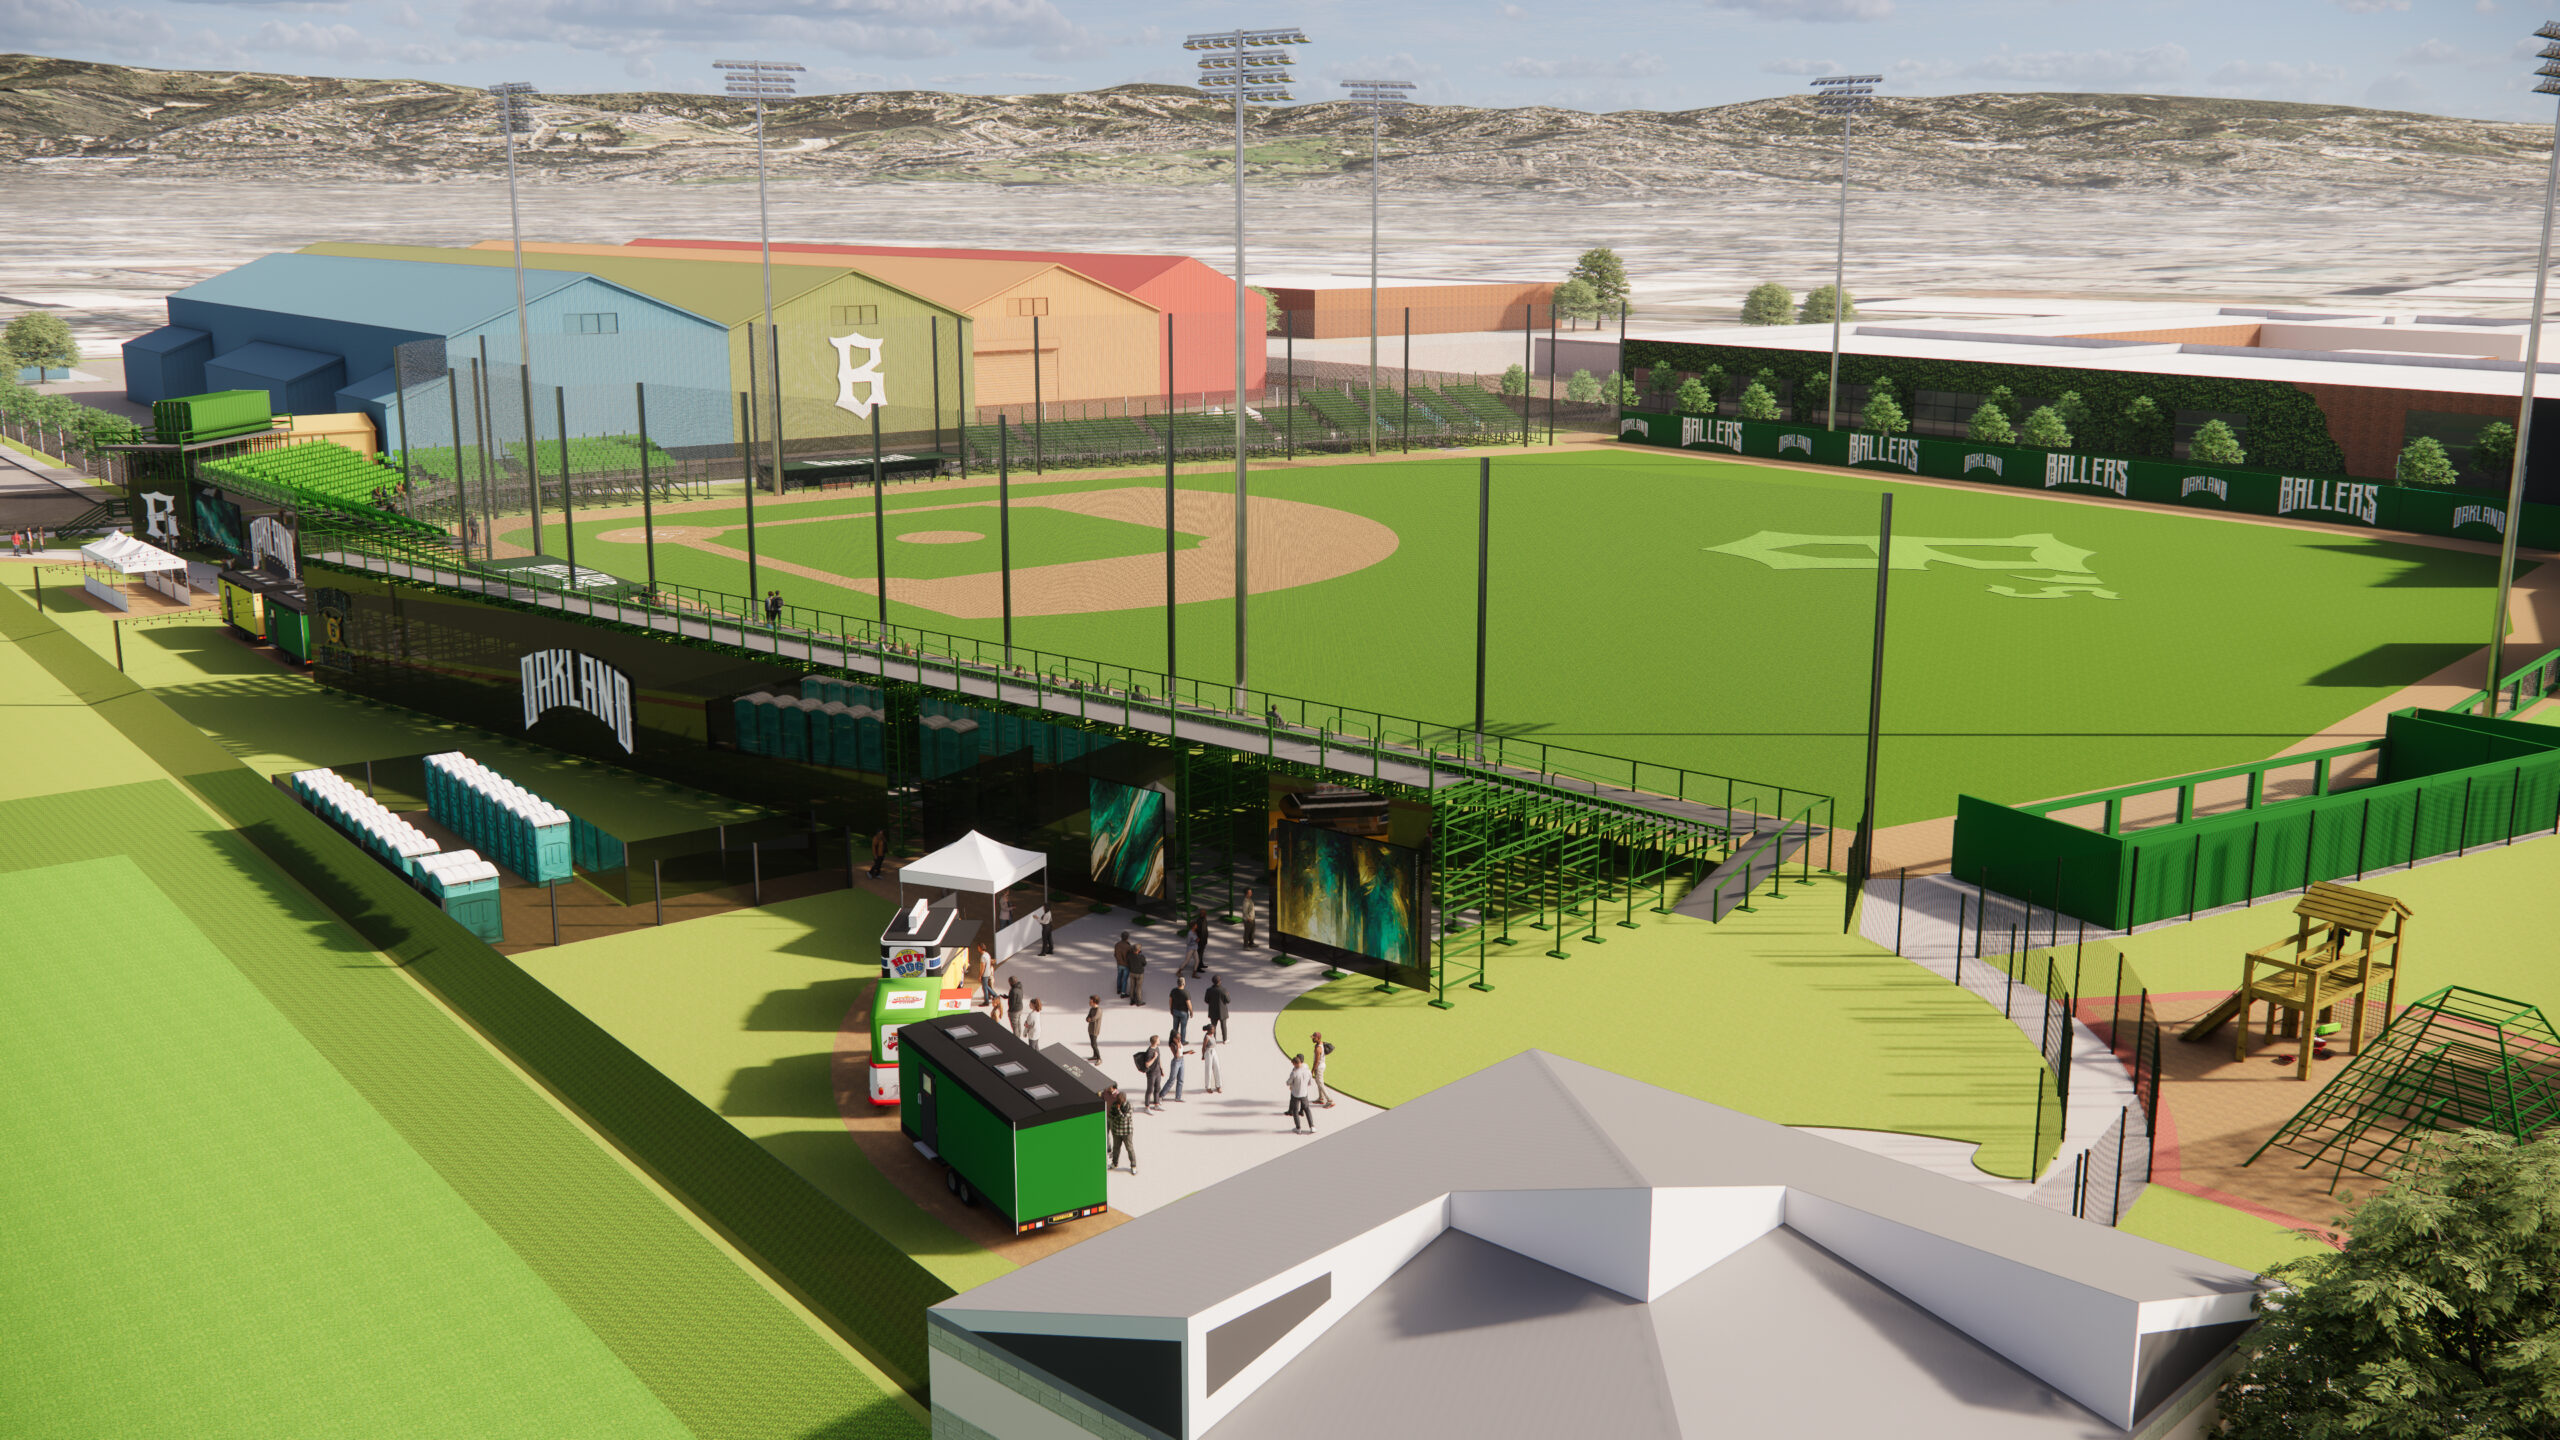 Oakland Ballers Baseball Field overview of the food truck plaza, rendering by Enscape for Canopy Team